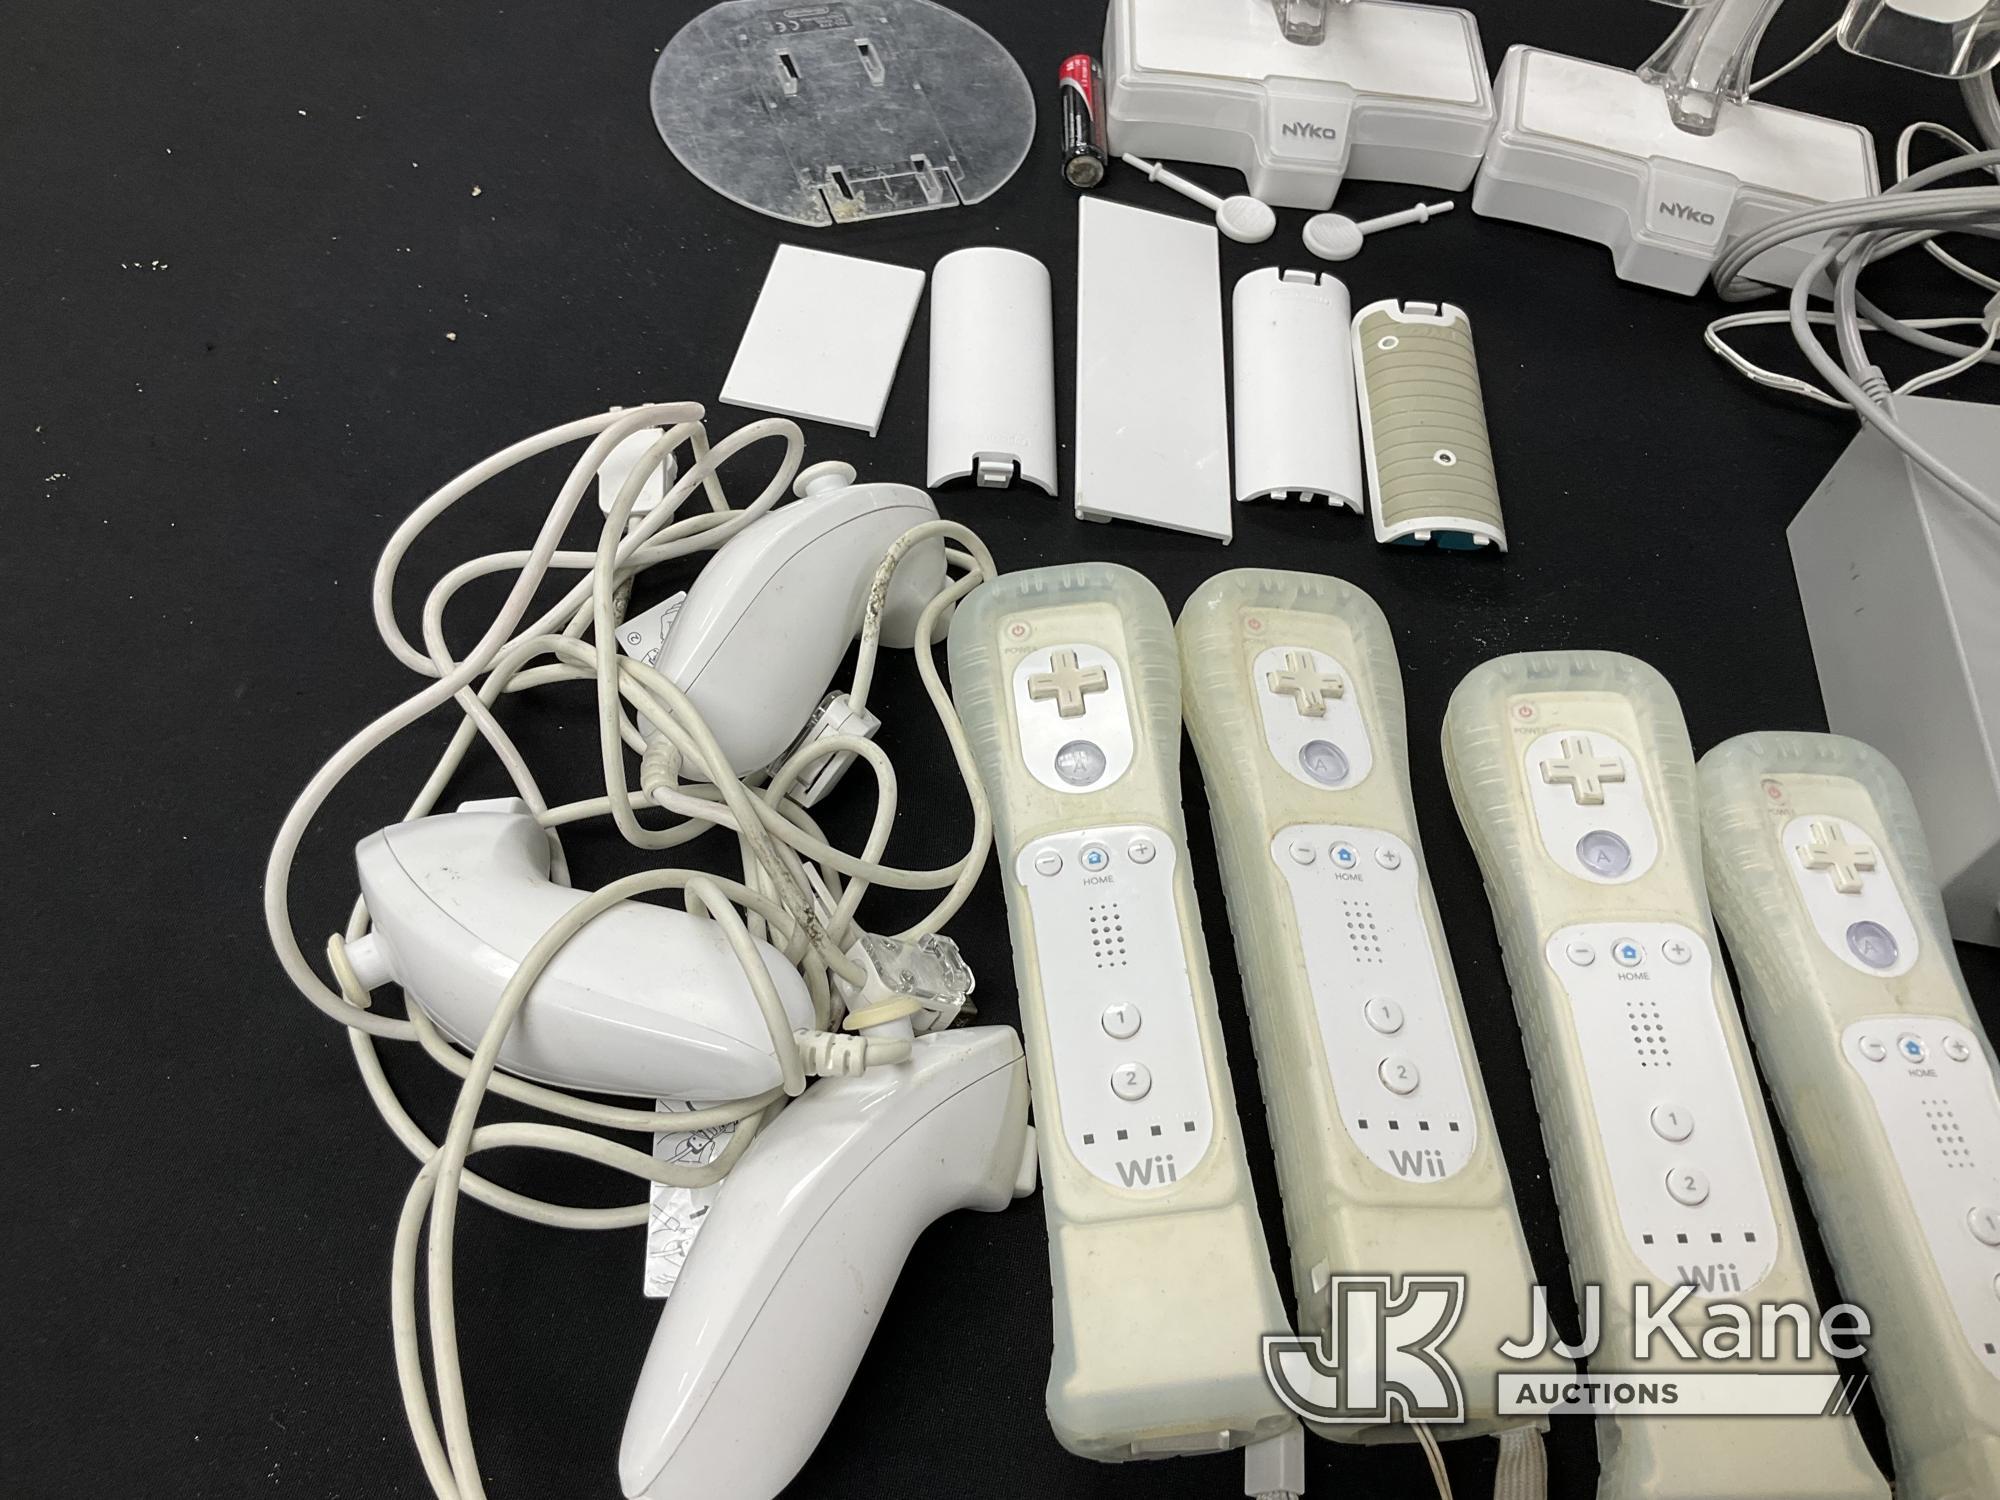 (Jurupa Valley, CA) Nintendo Wii With Accessories (Used) NOTE: This unit is being sold AS IS/WHERE I